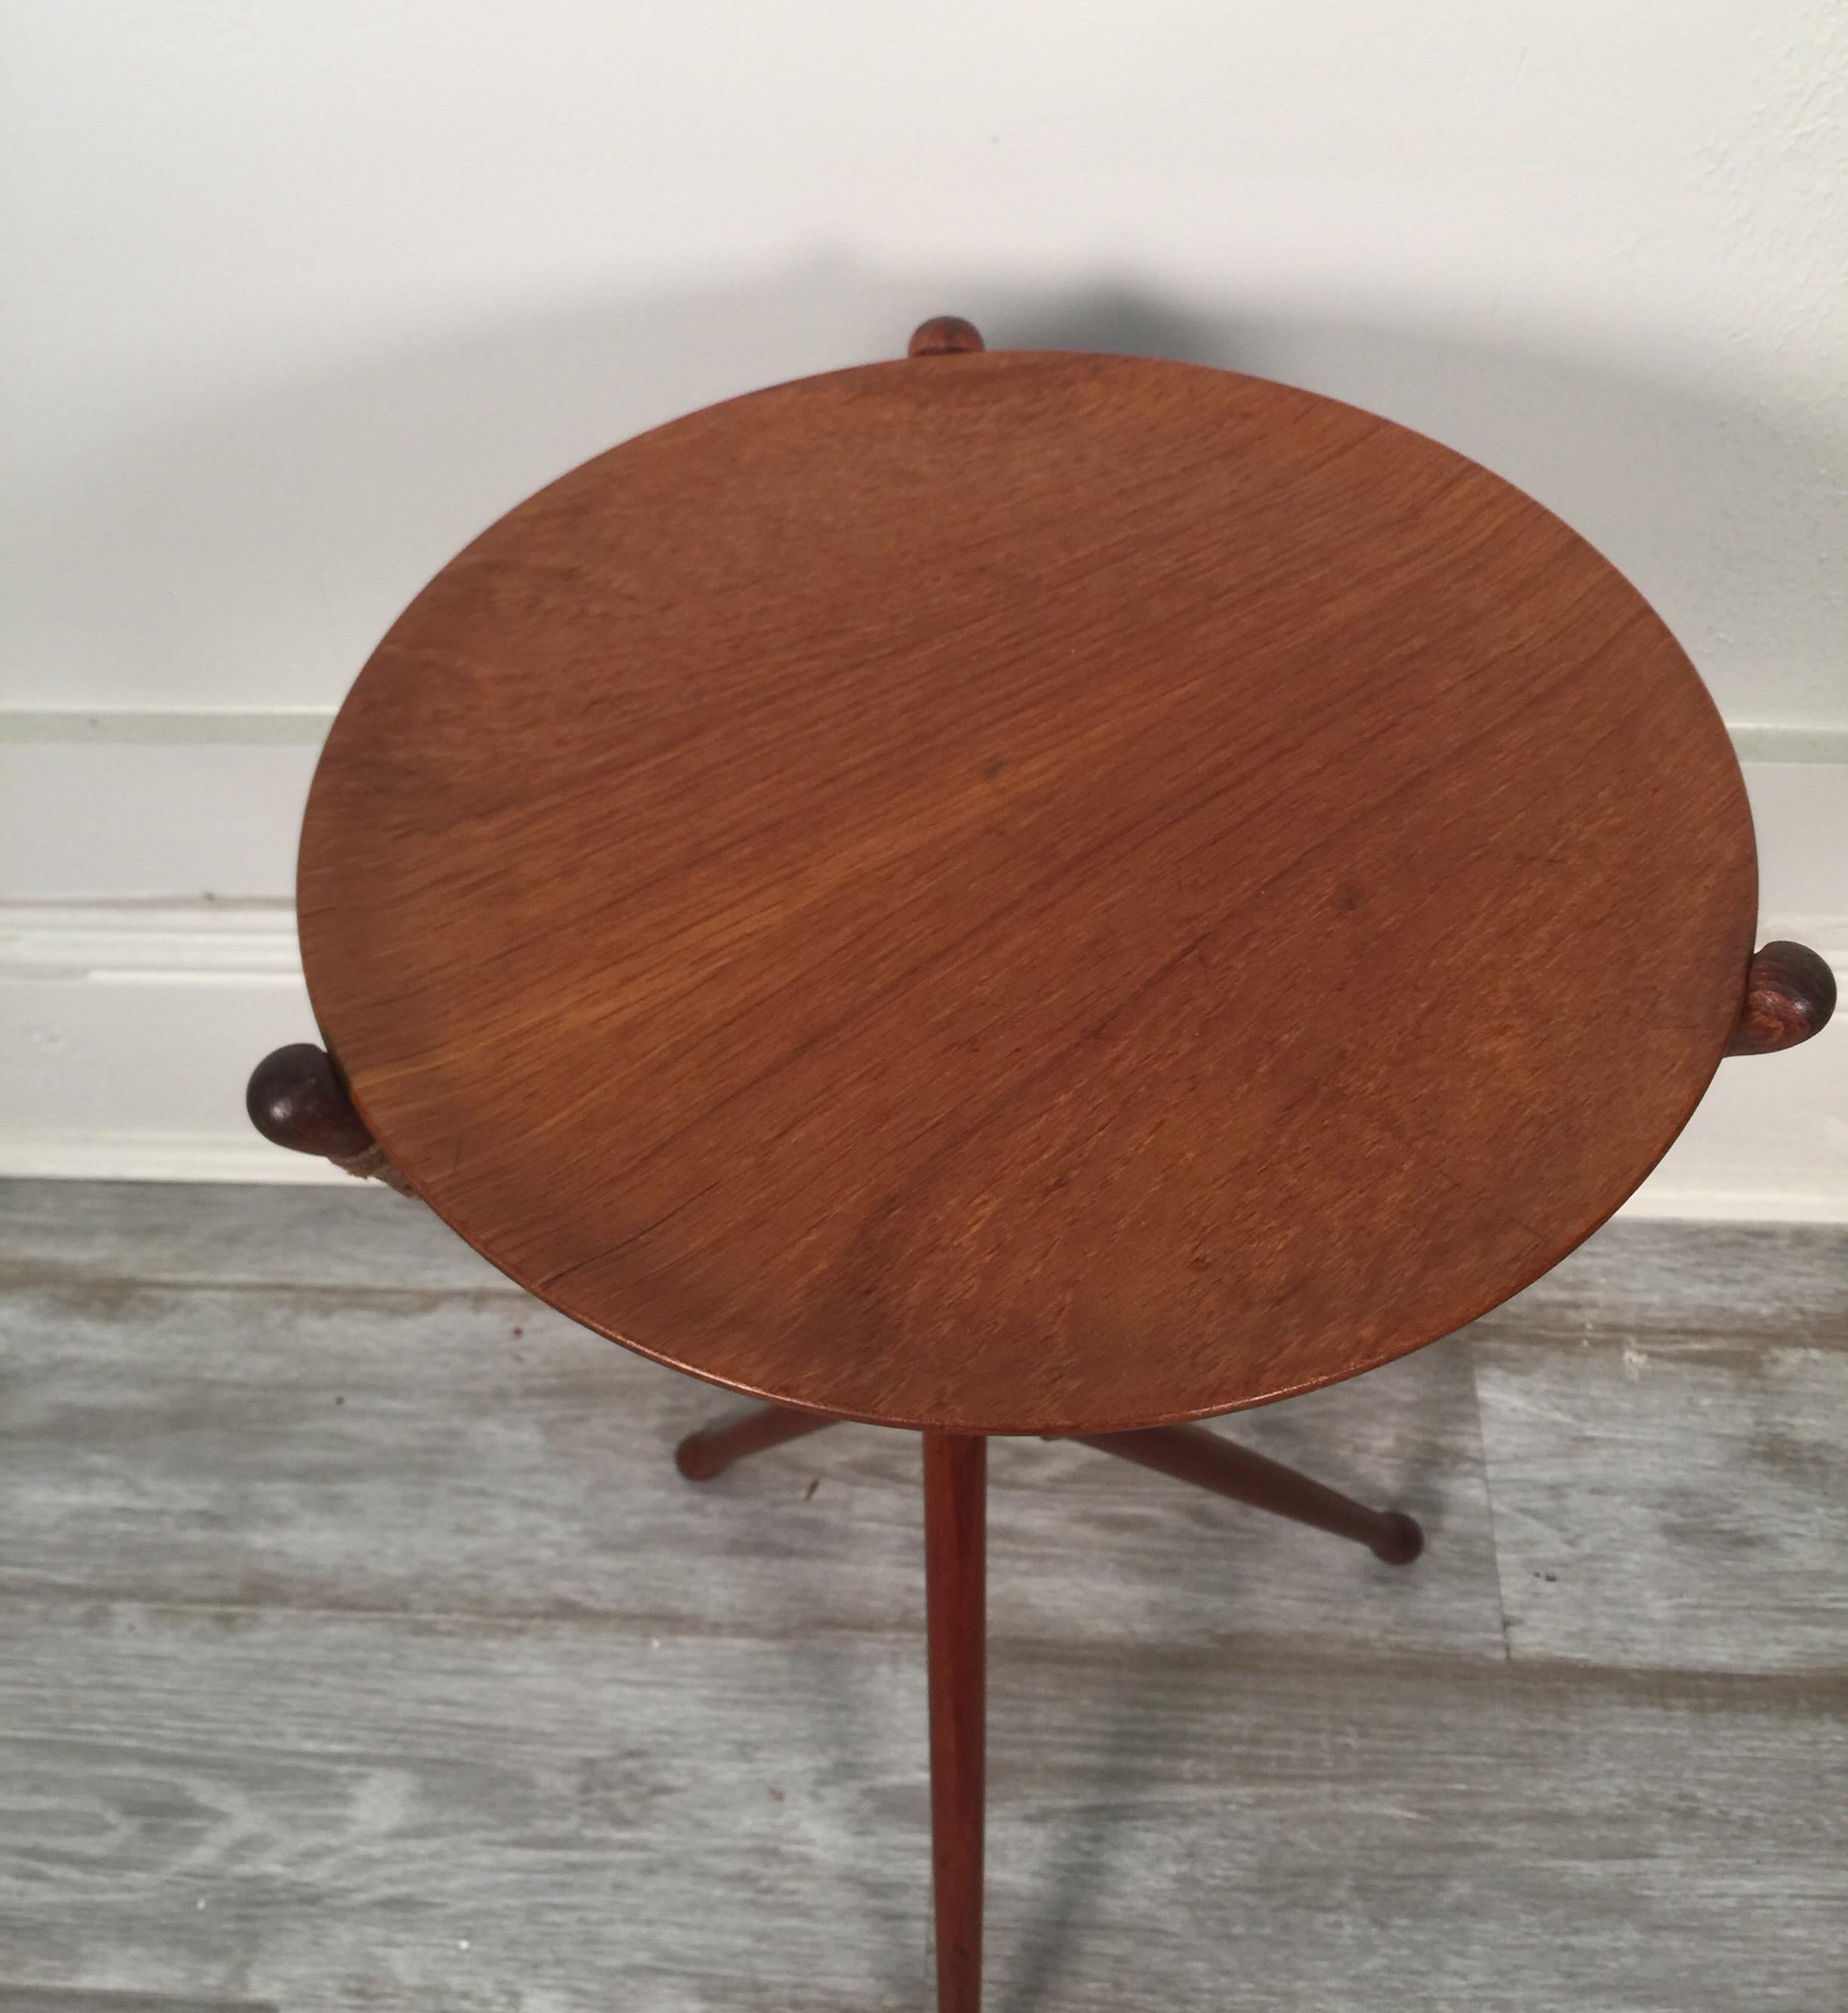 Collapsible tripod table with removable top by Nils Trautner for Ary in teak and brass with leather supports, Swedish, 1950s.